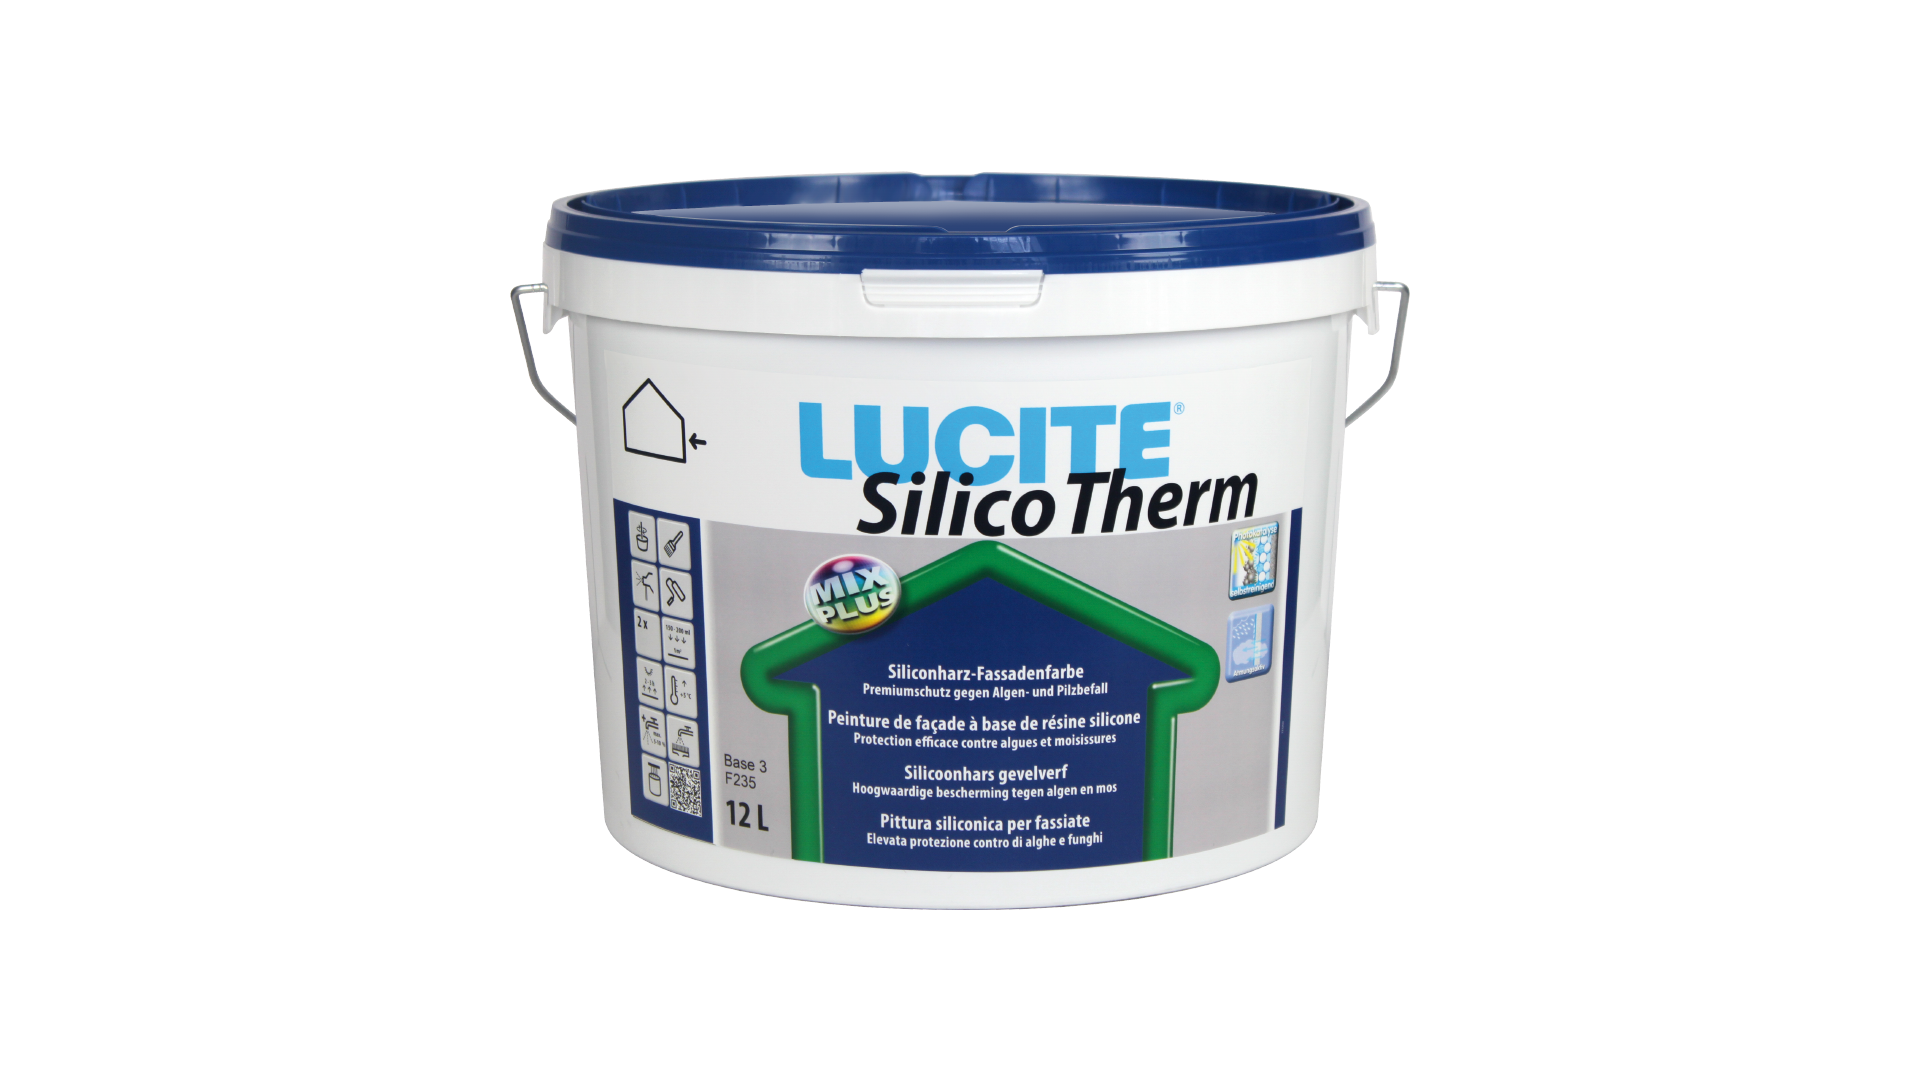 lucite-silico-therm